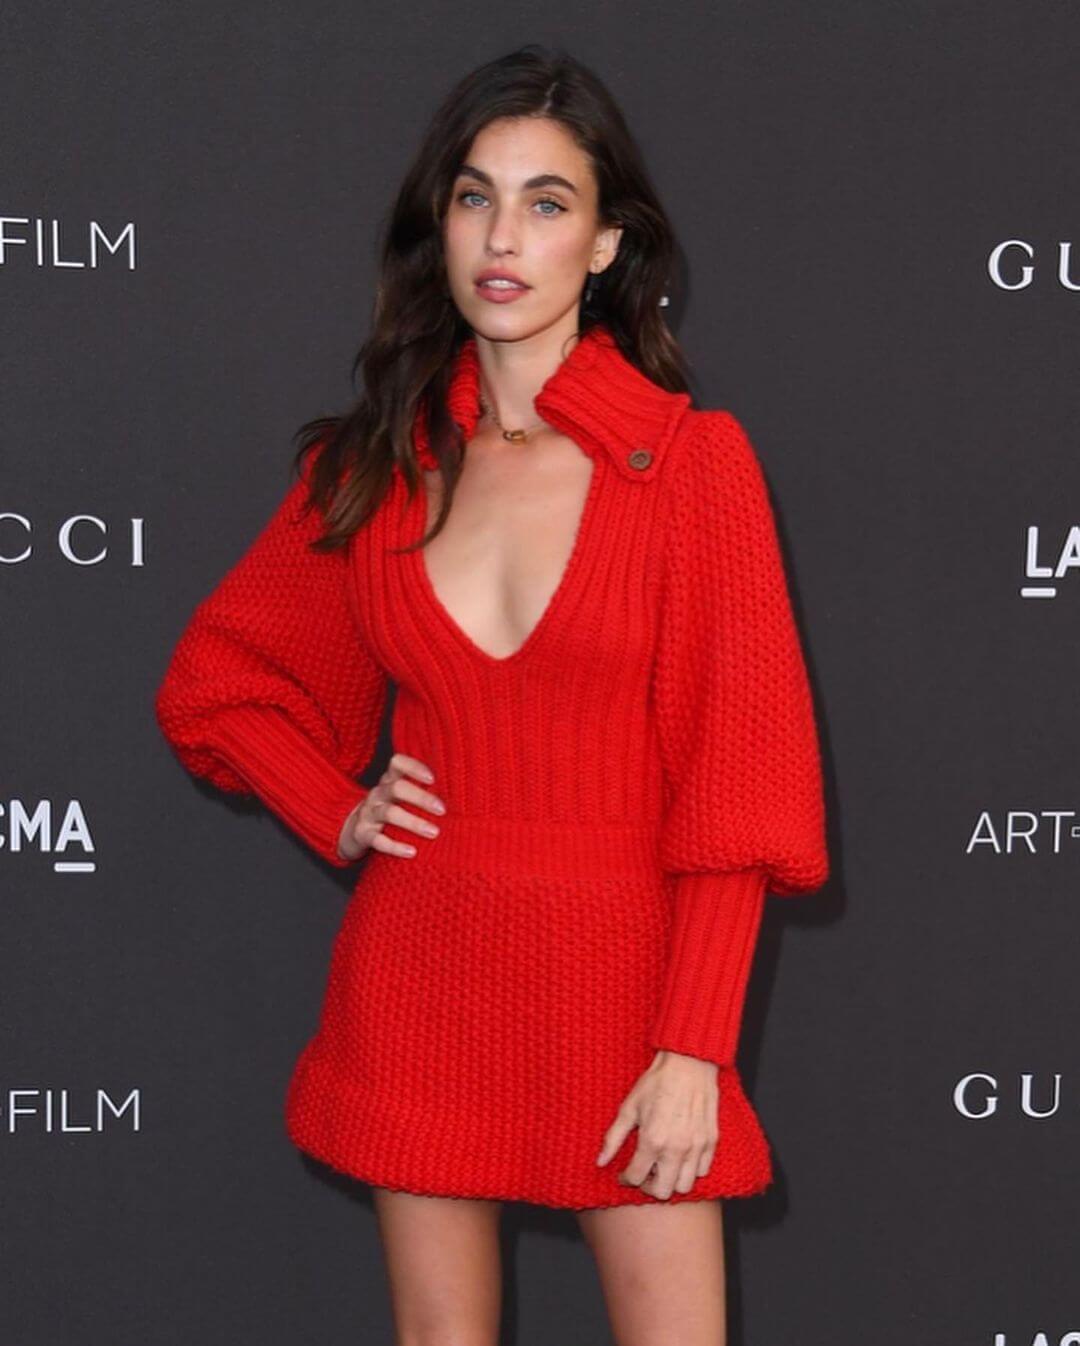 Elegance Redefined - Rainey Qualley Looks Flawless In Her Fiery Red Ensemble